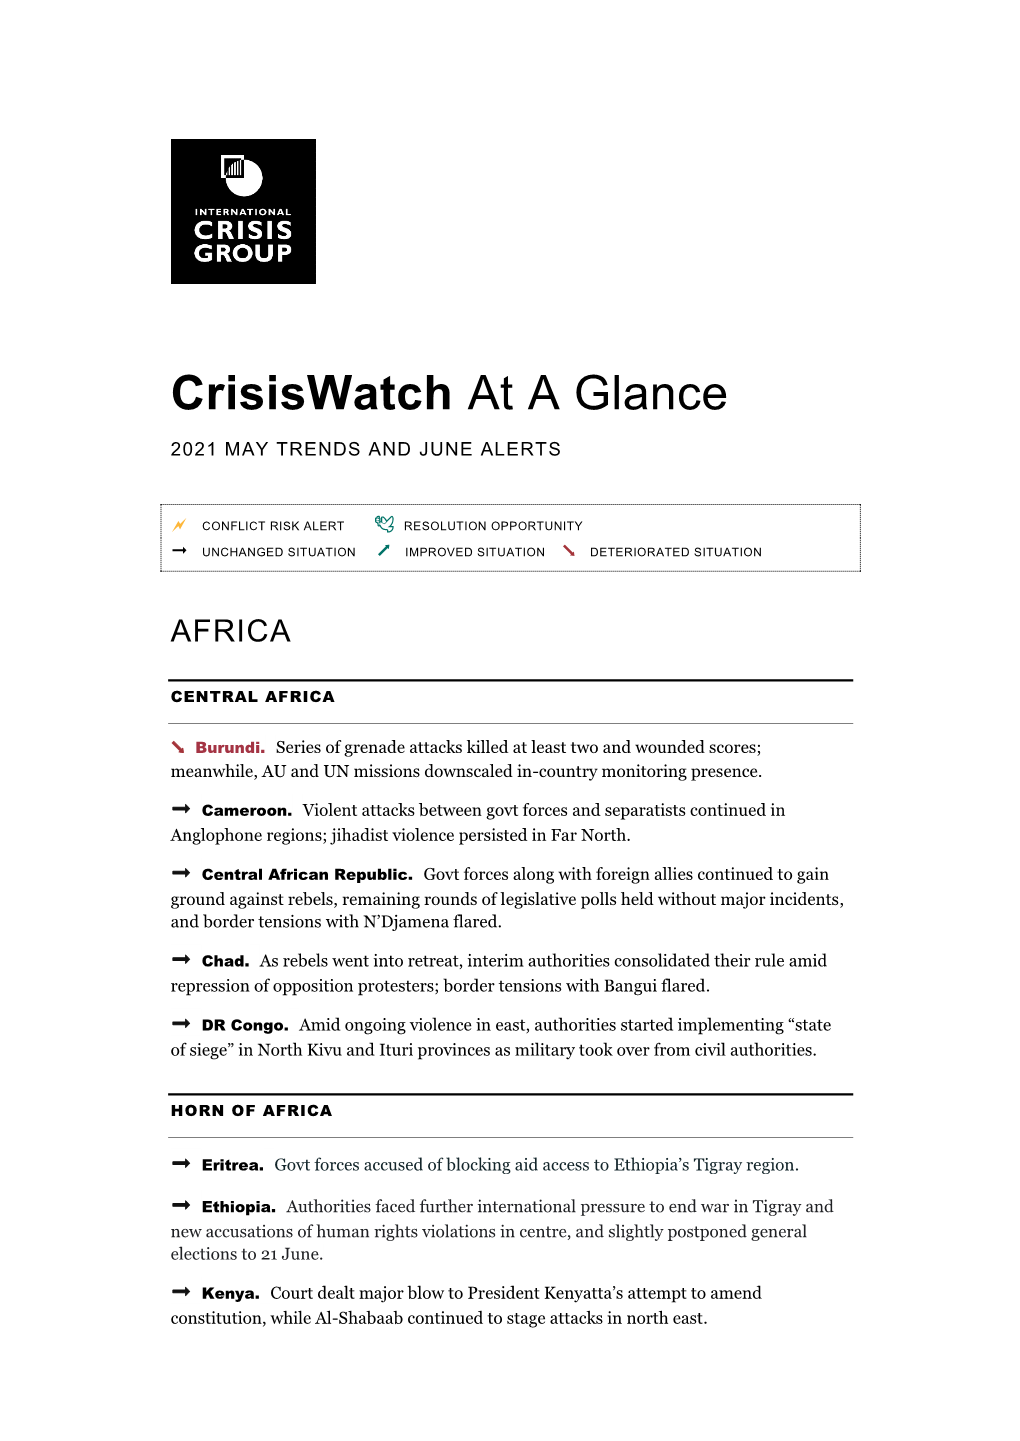 Crisiswatch at a Glance May 2021.Pdf